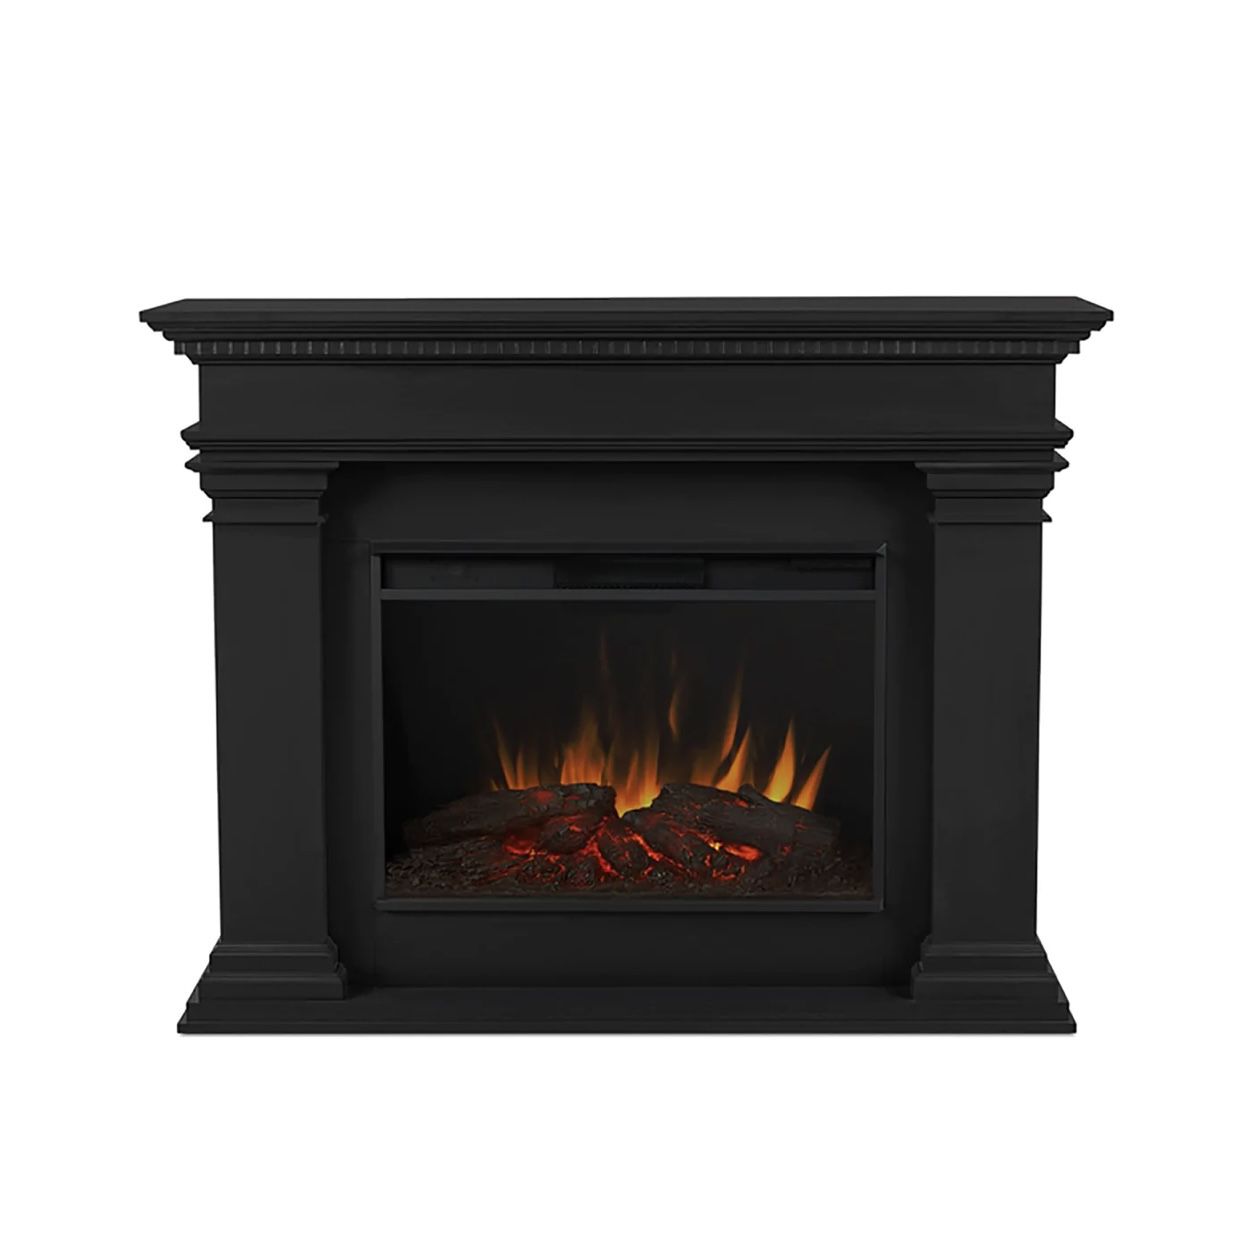 Electric fireplace With Black Mantel 